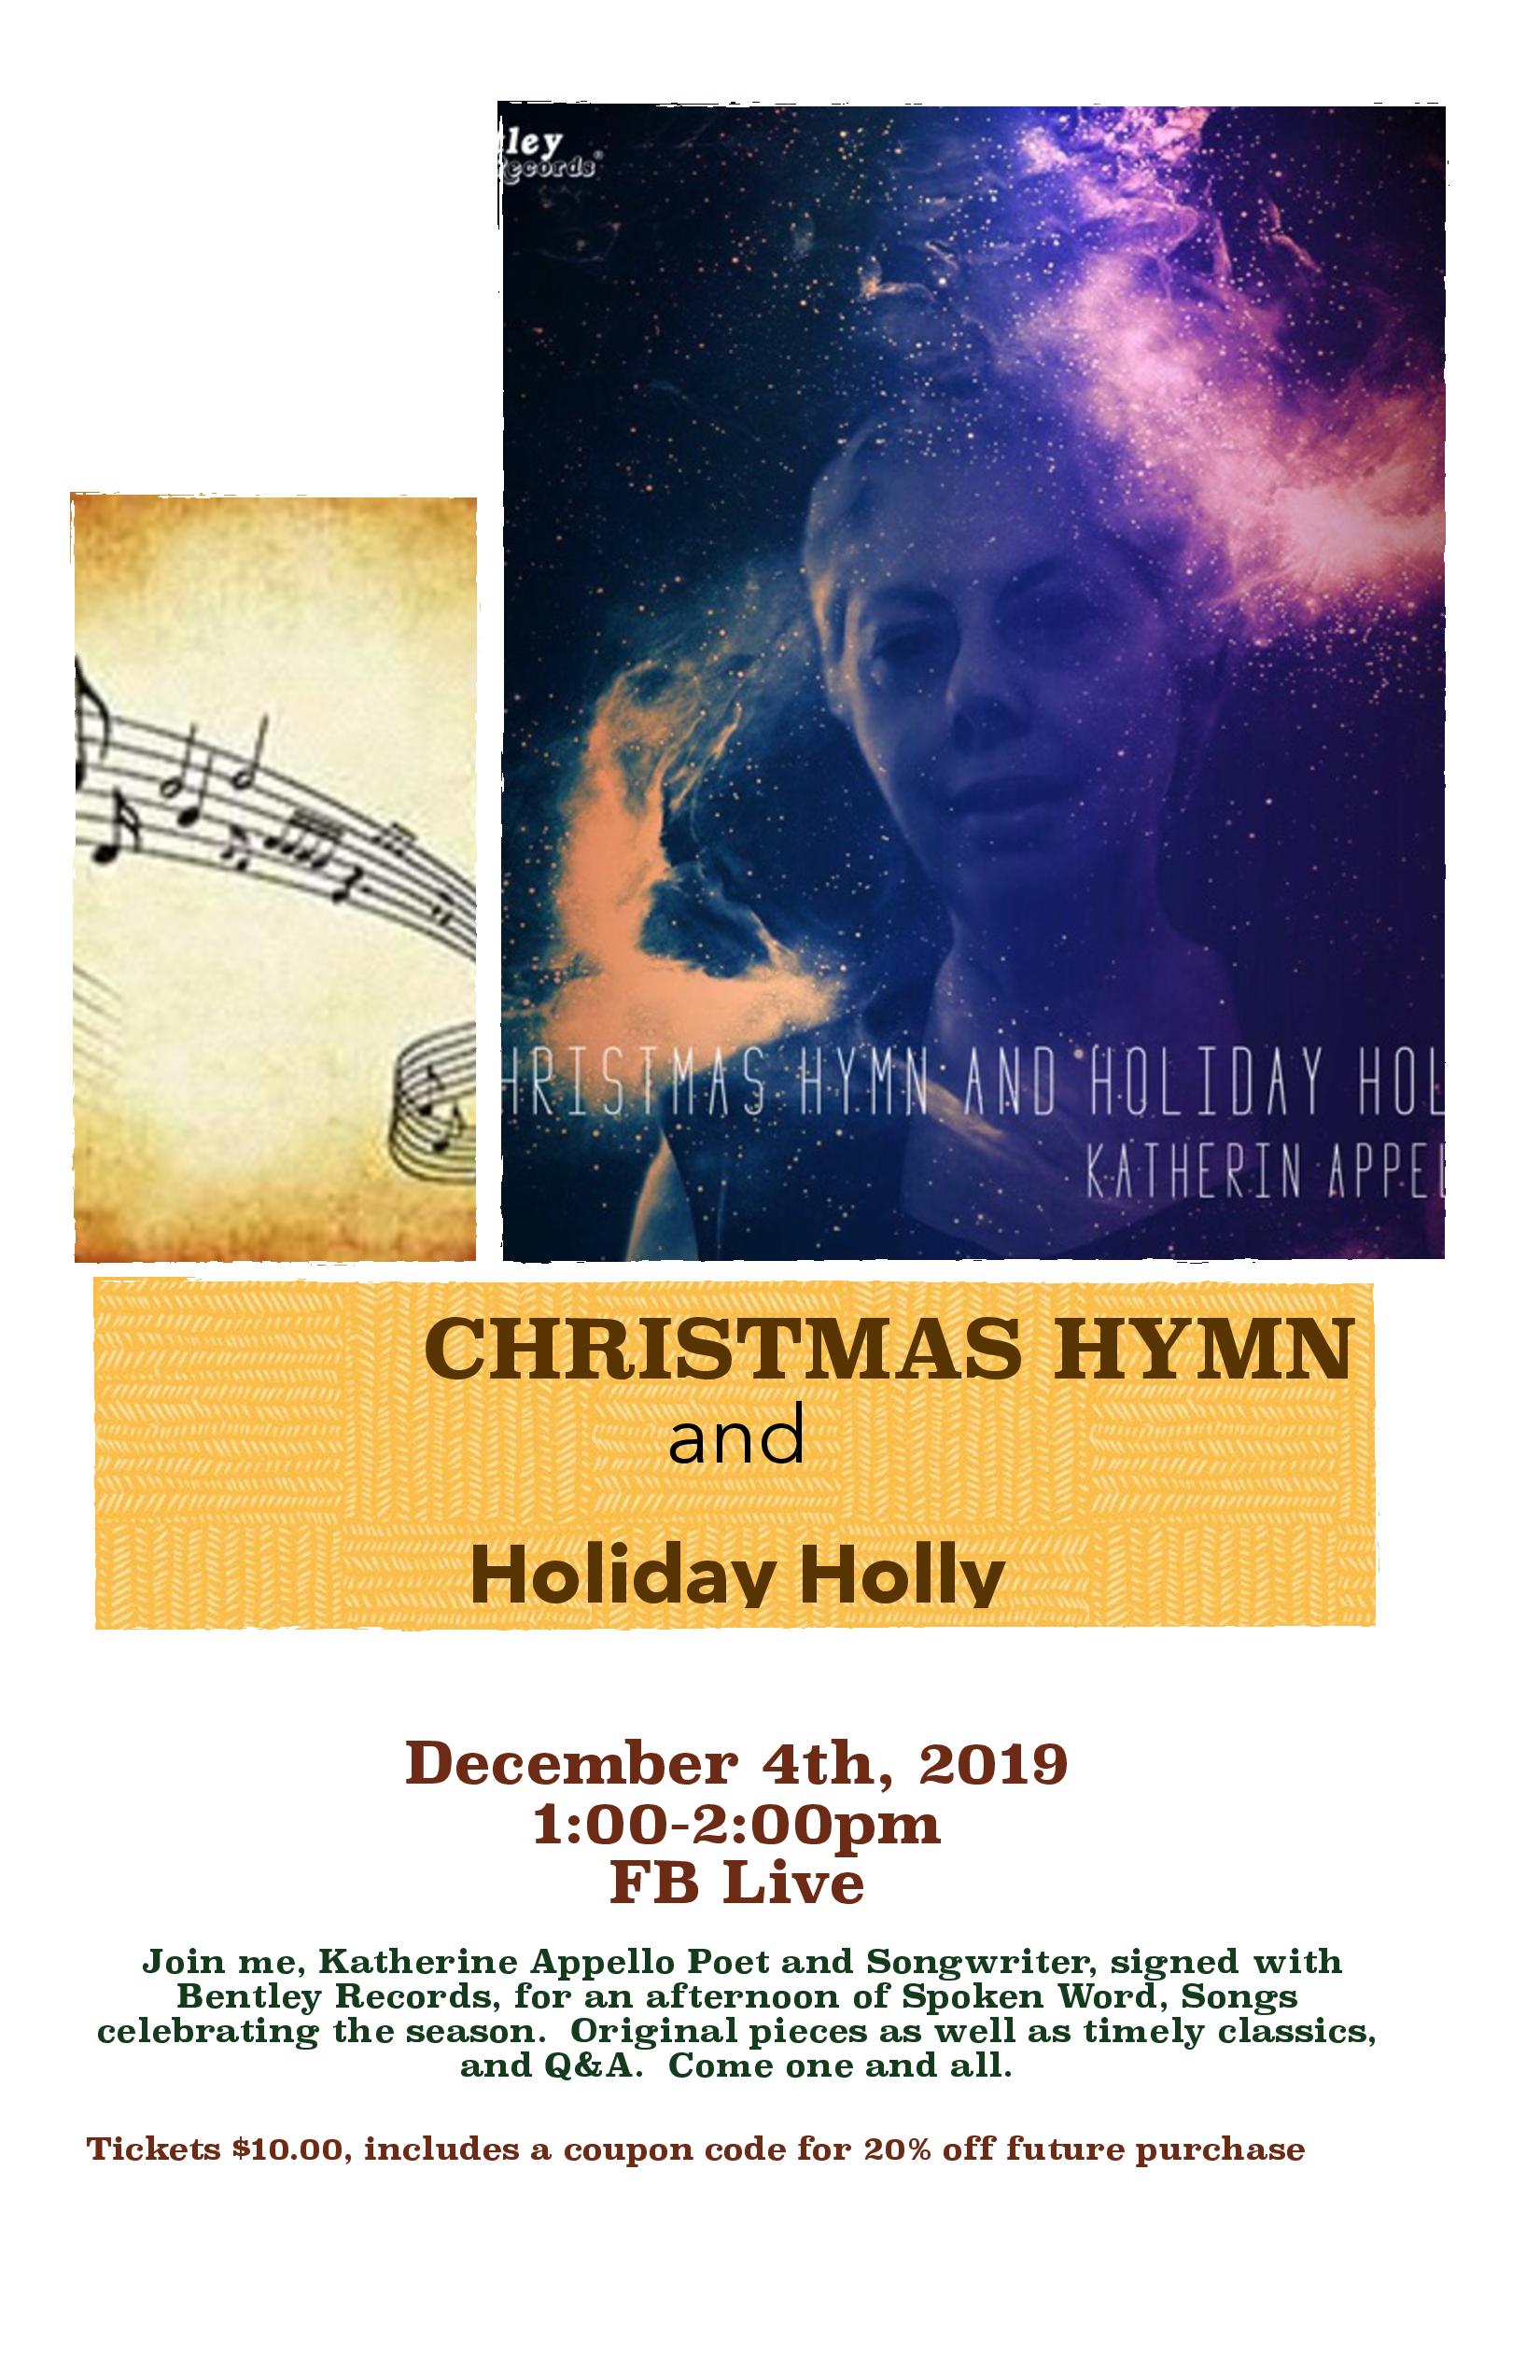 Christmas Hymn And Holiday Holly With Katherine Appello, New York, United States